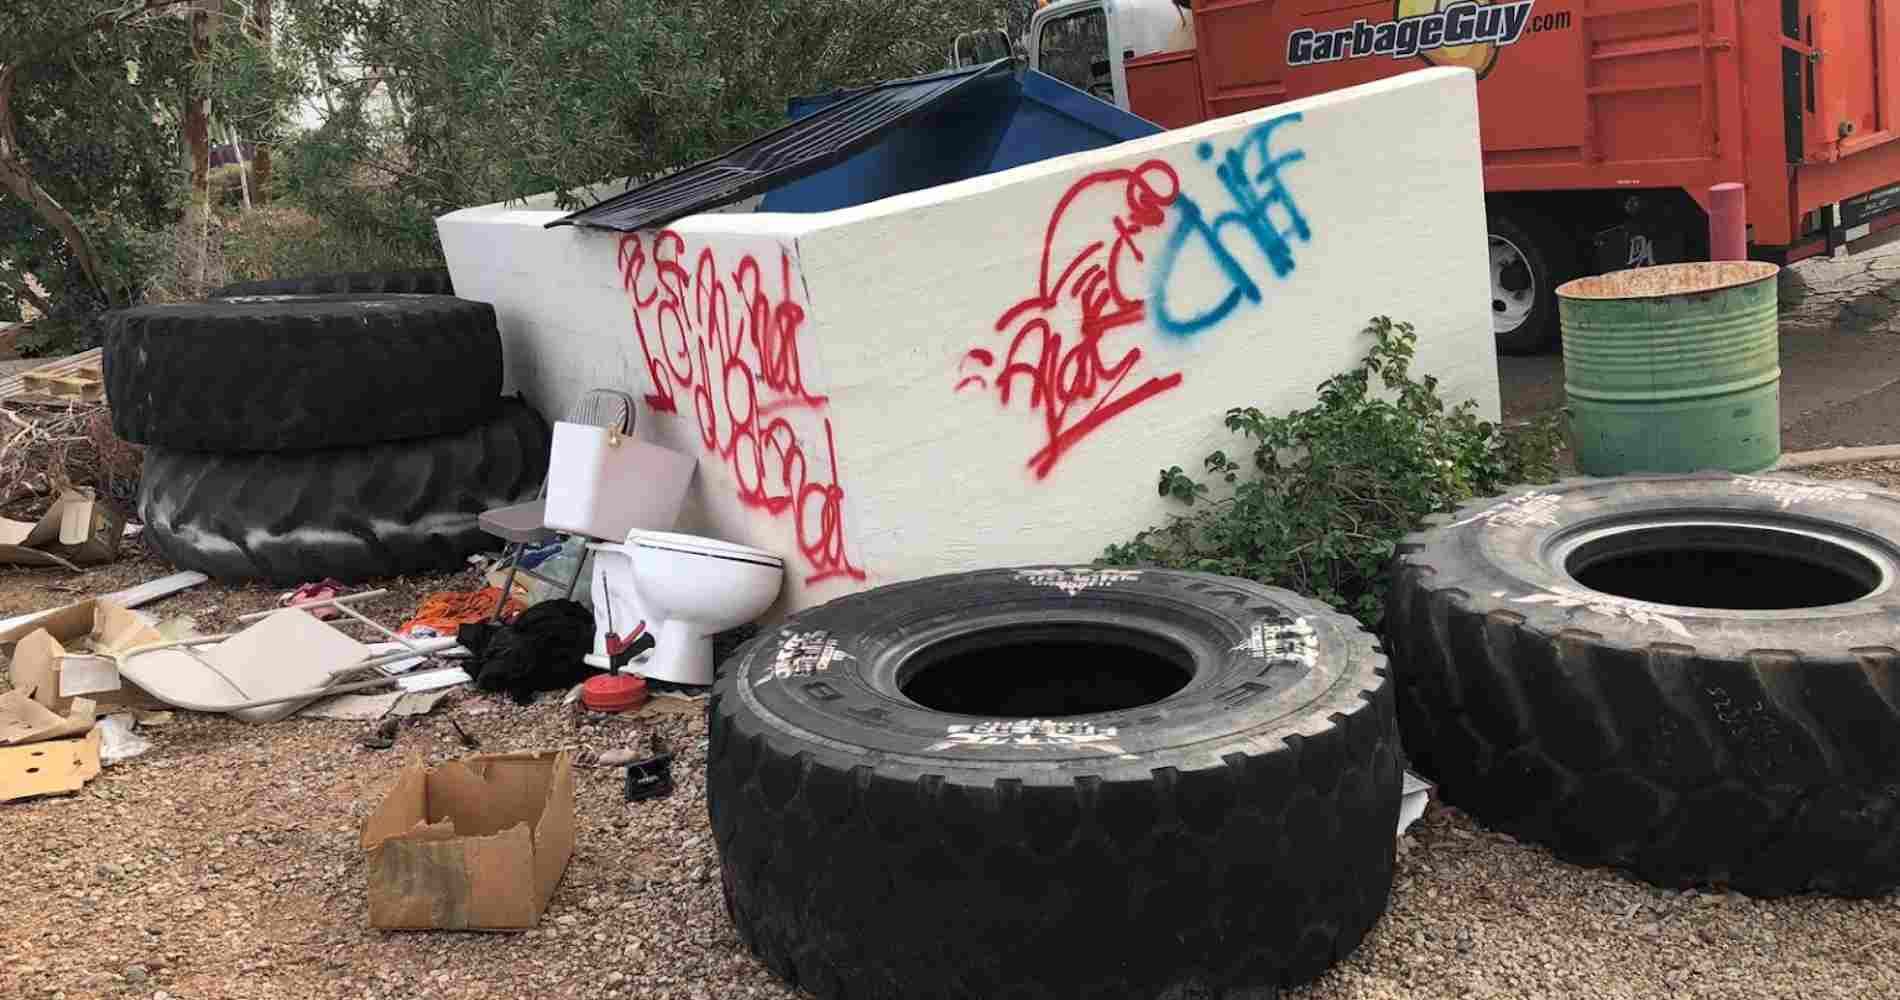 #1 for Tire Disposal in Waddell, AZ with Over 1200 5-Star Reviews!